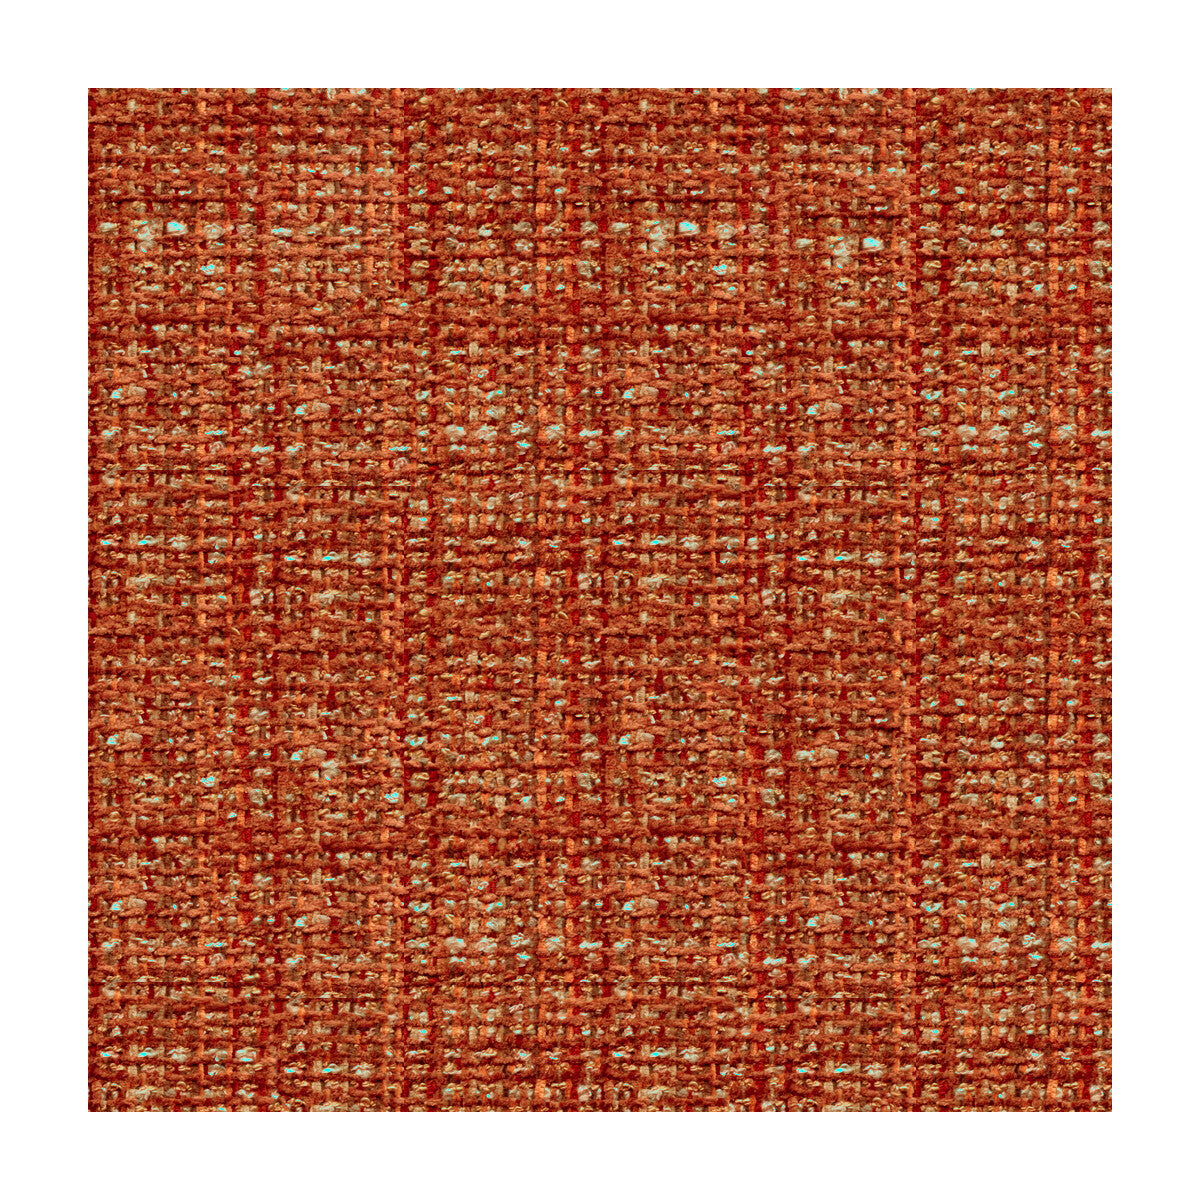 Boucle Texture fabric in red/pink color - pattern BR-800041.M11.0 - by Brunschwig &amp; Fils